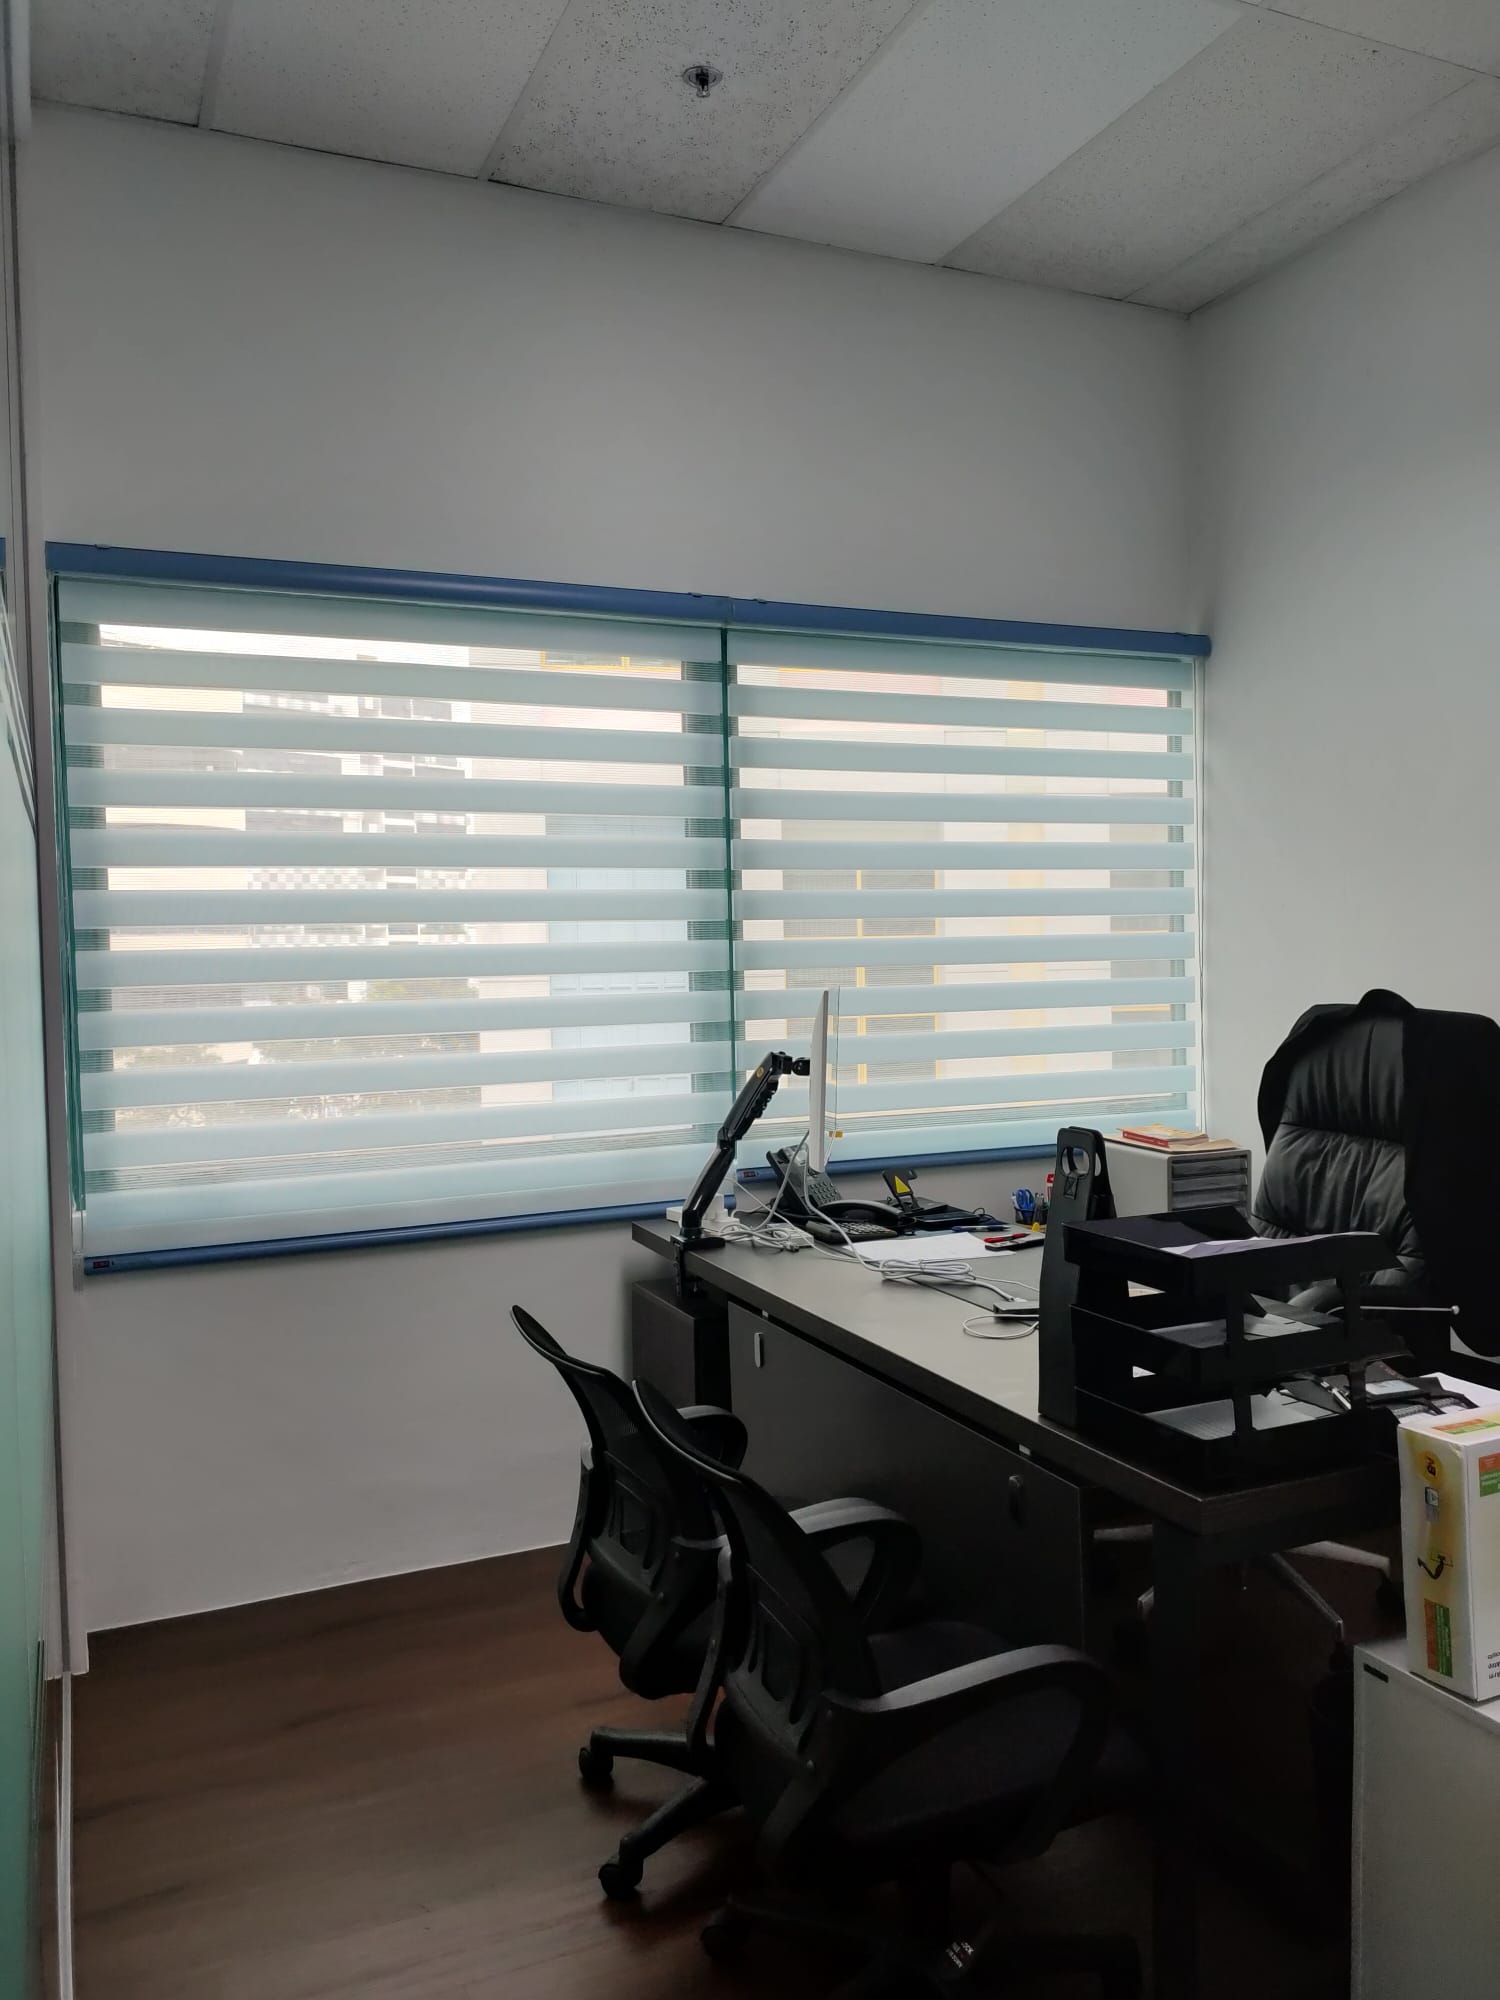 This is a Picture of Dimmer Korean combi Blinds at KA center Singapore Office